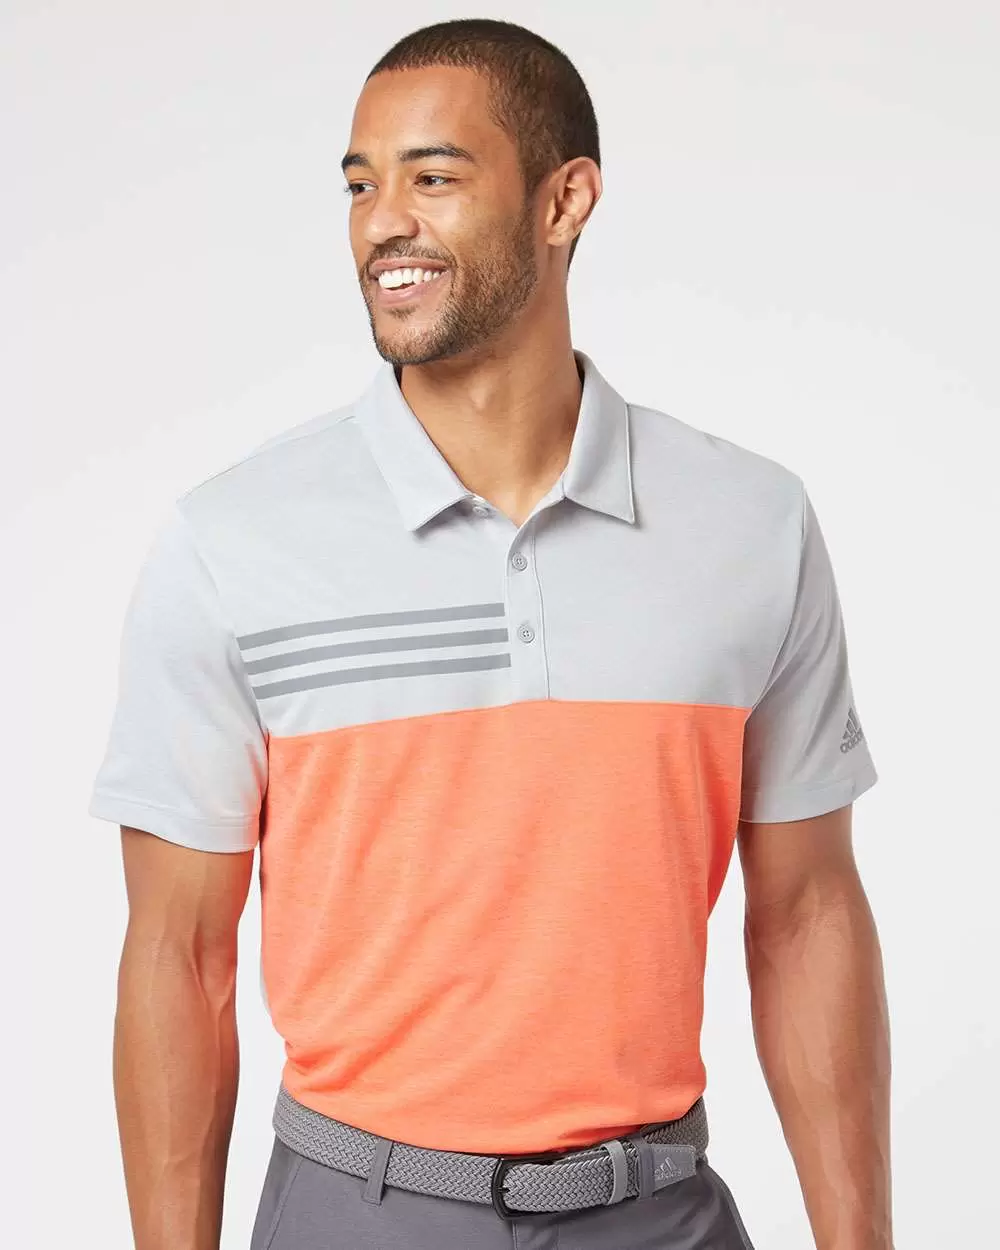 Golf Clothing A508 Heathered Colorblock 3-Stripes Sport Shirt From $36.61